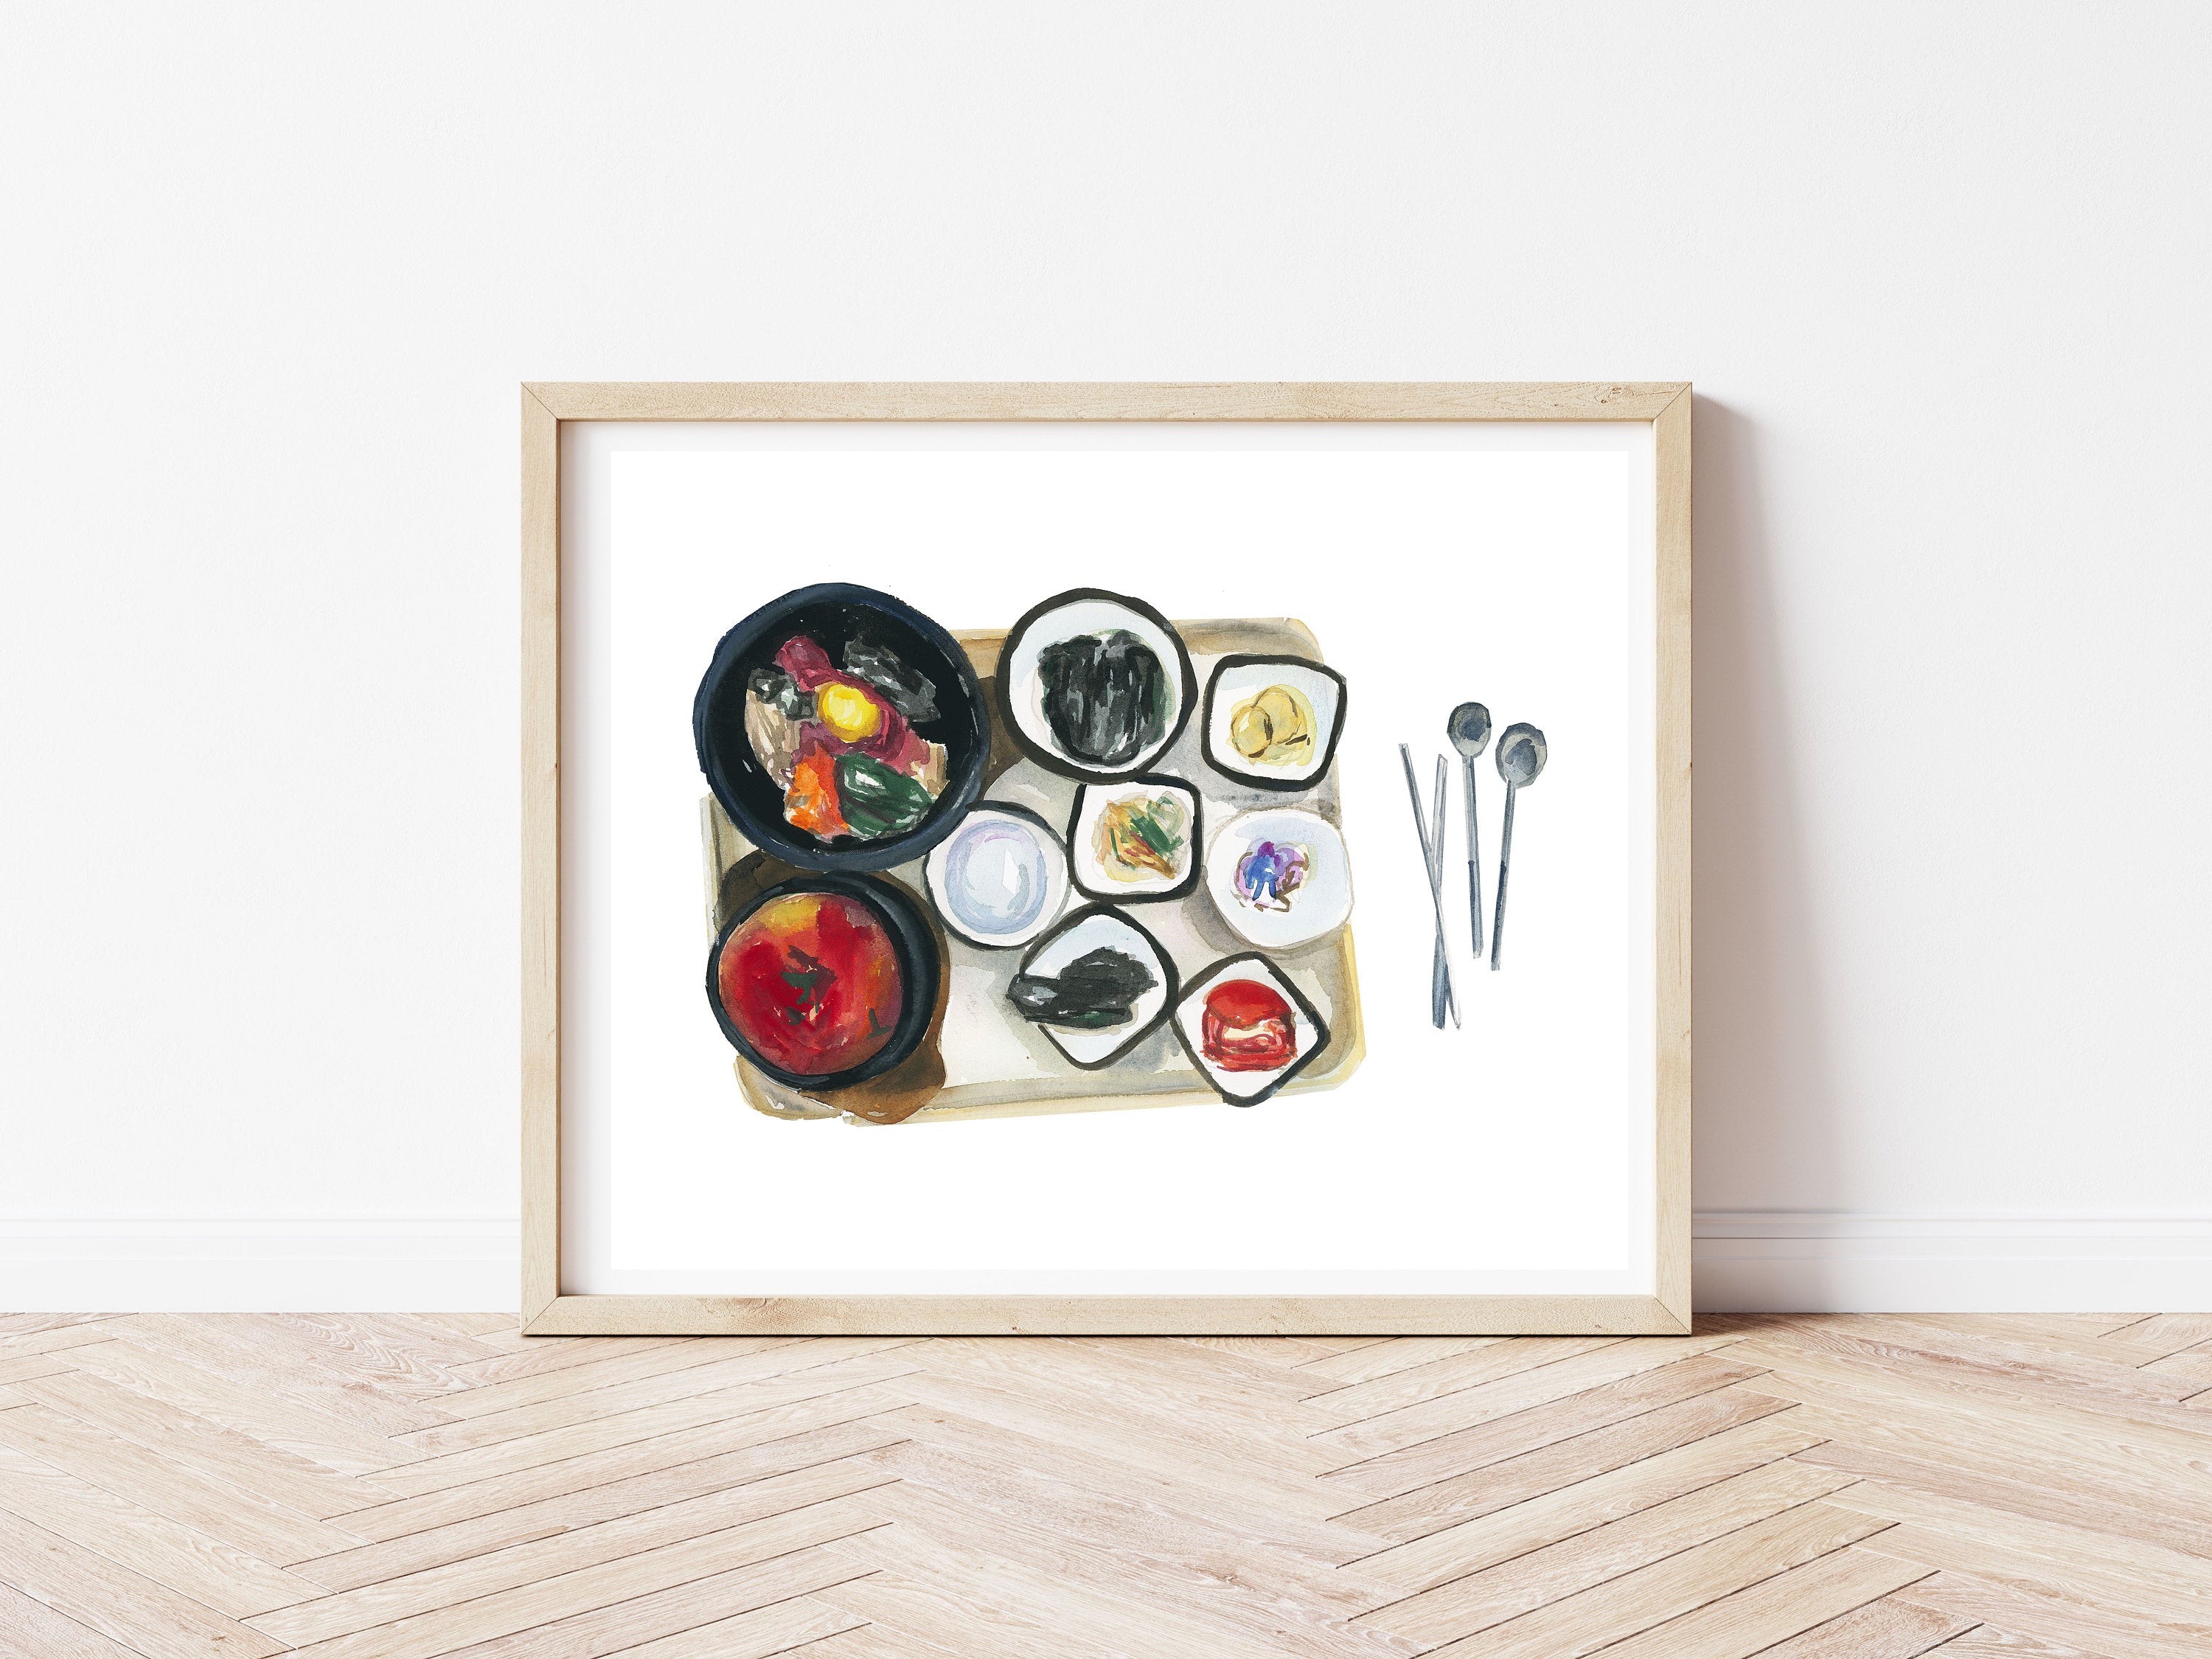 Korean lunch print of painting by Medjool Studio. Watercolour painting featuring a traditional Korean meal from Seoul including traditional soup, rice, bipimpap, kimchi, and other sides.